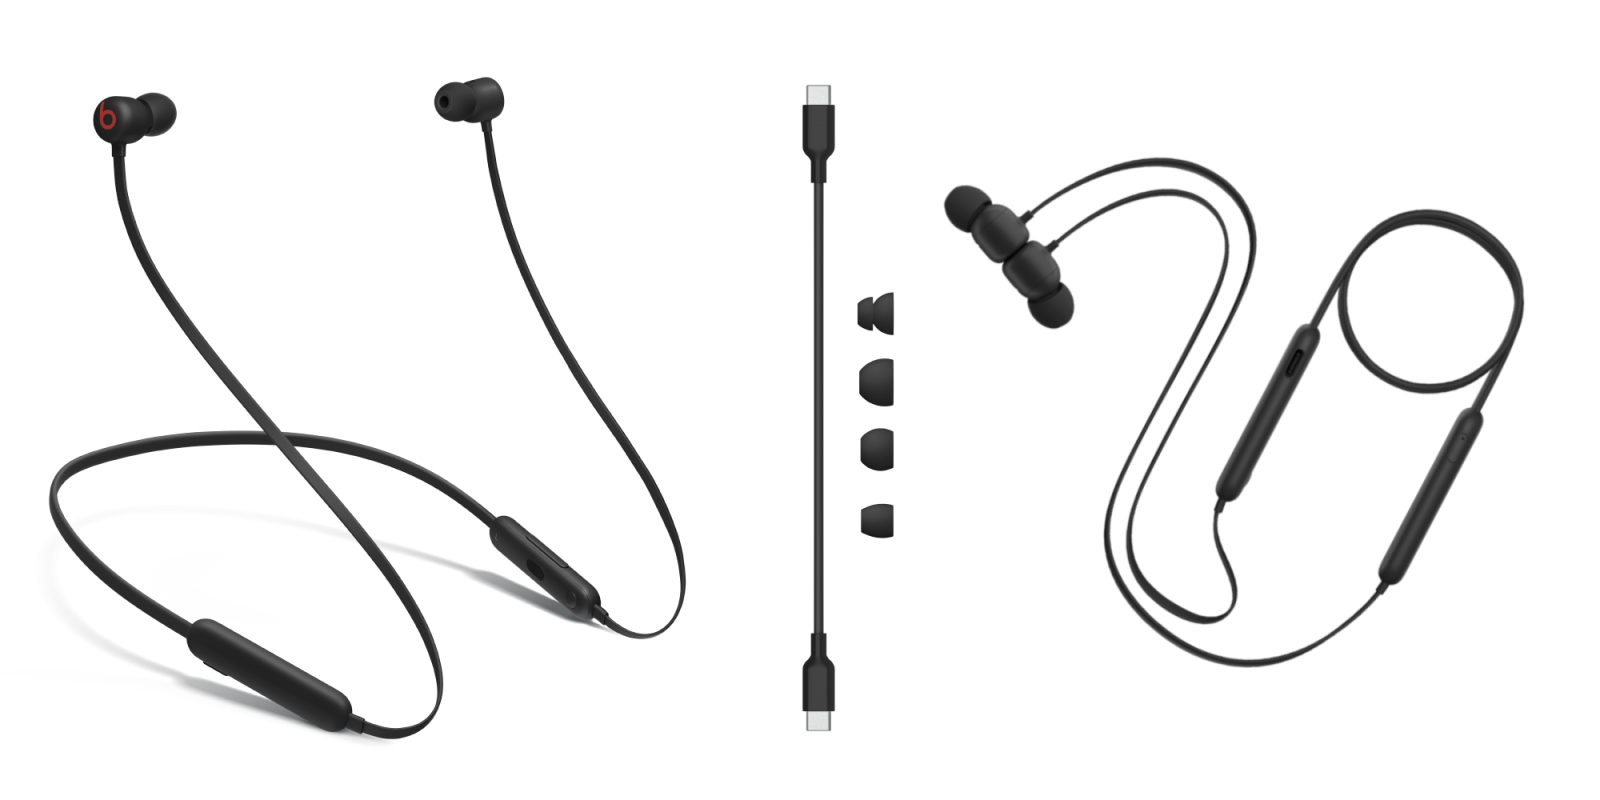 Beats Flex replaces BeatsX for $49 with USB-C charging, battery life, Apple chip 9to5Mac